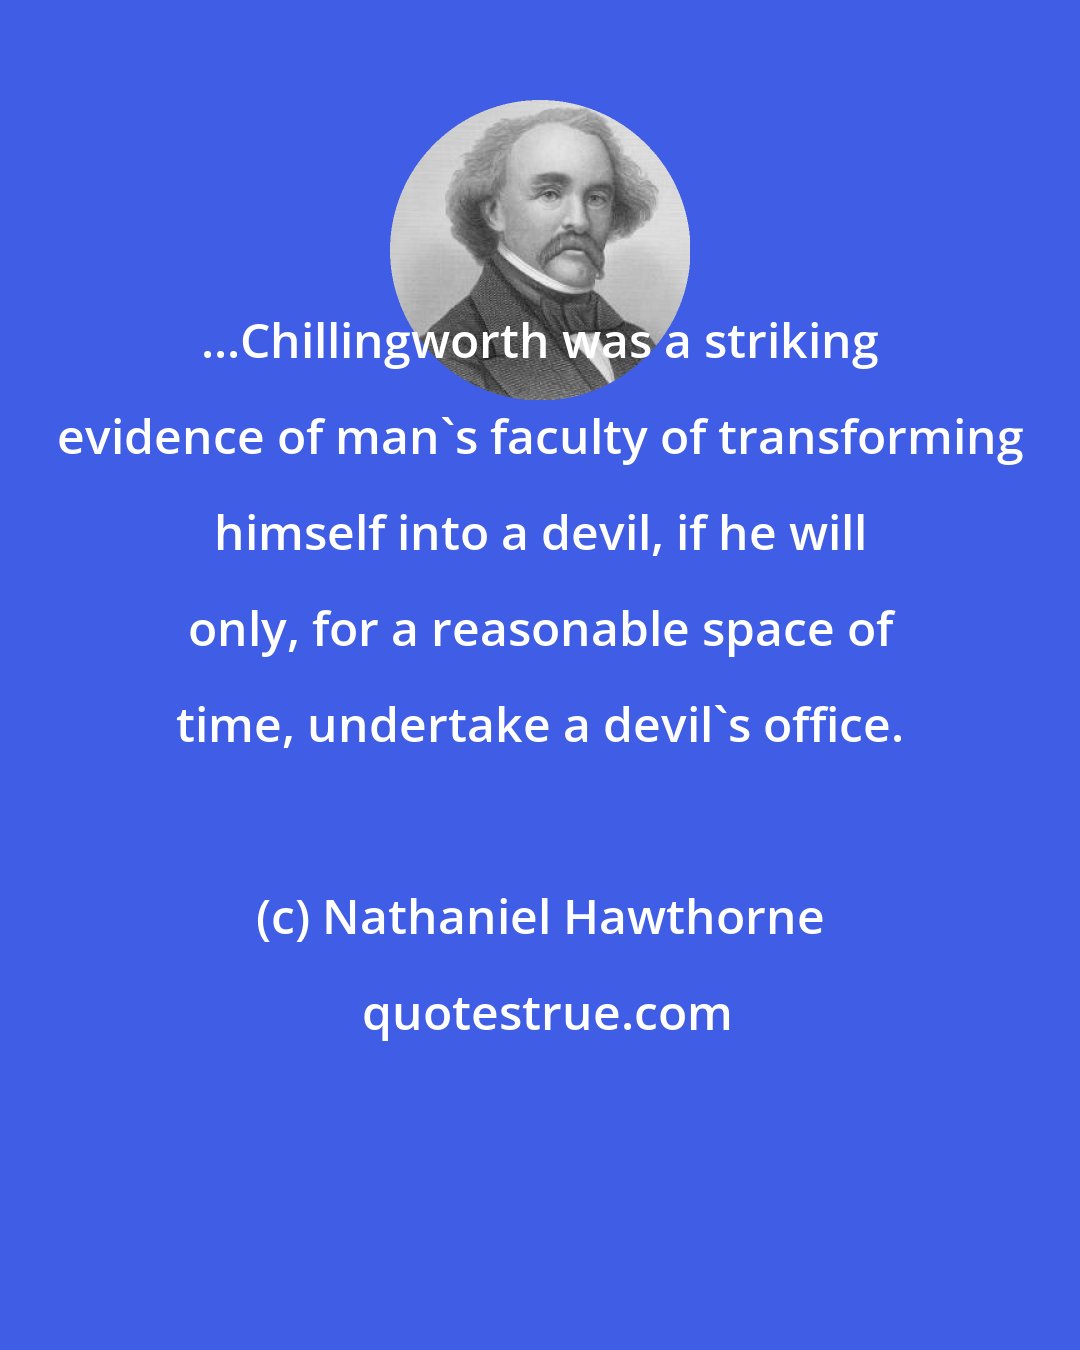 Nathaniel Hawthorne: ...Chillingworth was a striking evidence of man's faculty of transforming himself into a devil, if he will only, for a reasonable space of time, undertake a devil's office.